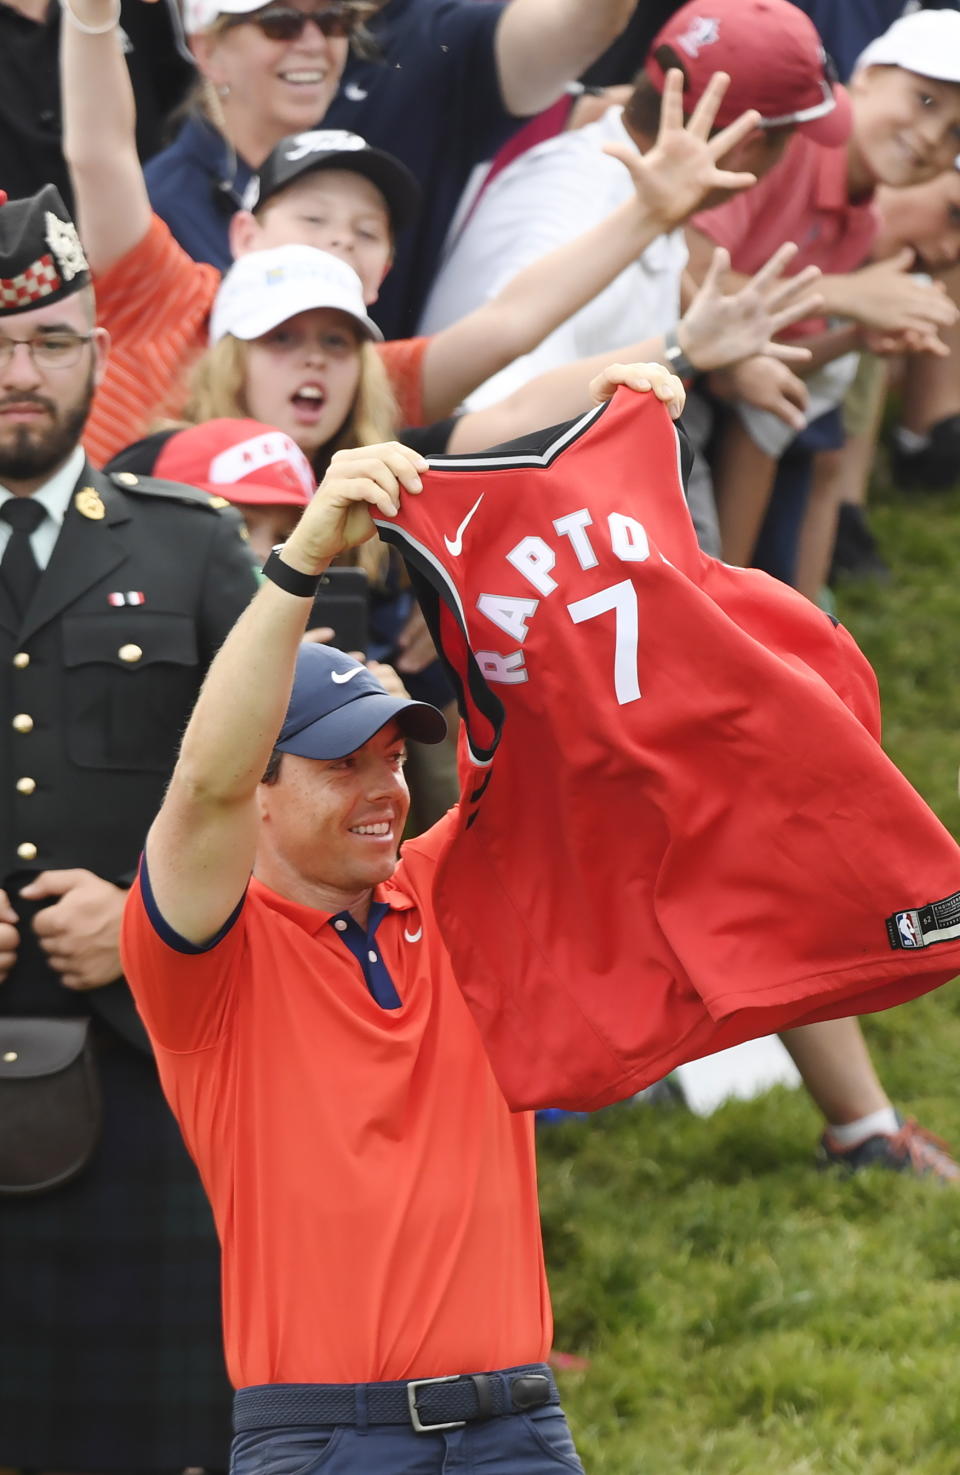 Rory McIlroy, of Northern Ireland, raises a Toronto Raptors jersey on the 18th green after winning the Canadian Open golf championship in Ancaster, Ontario, Sunday, June 9, 2019. (Nathan Denette/The Canadian Press via AP)